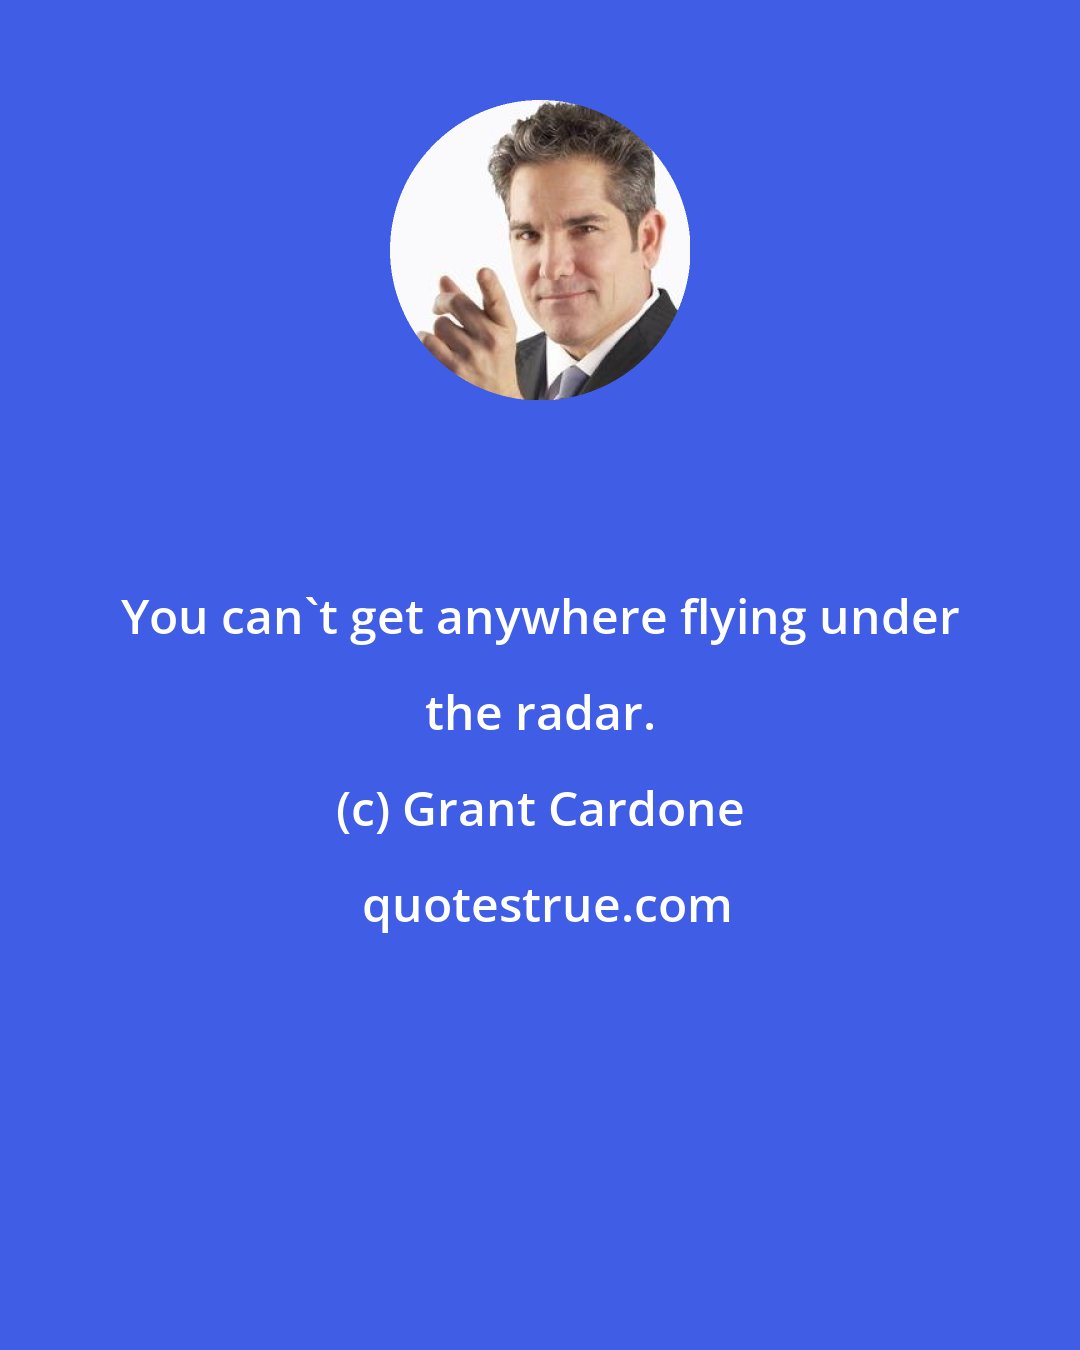 Grant Cardone: You can't get anywhere flying under the radar.